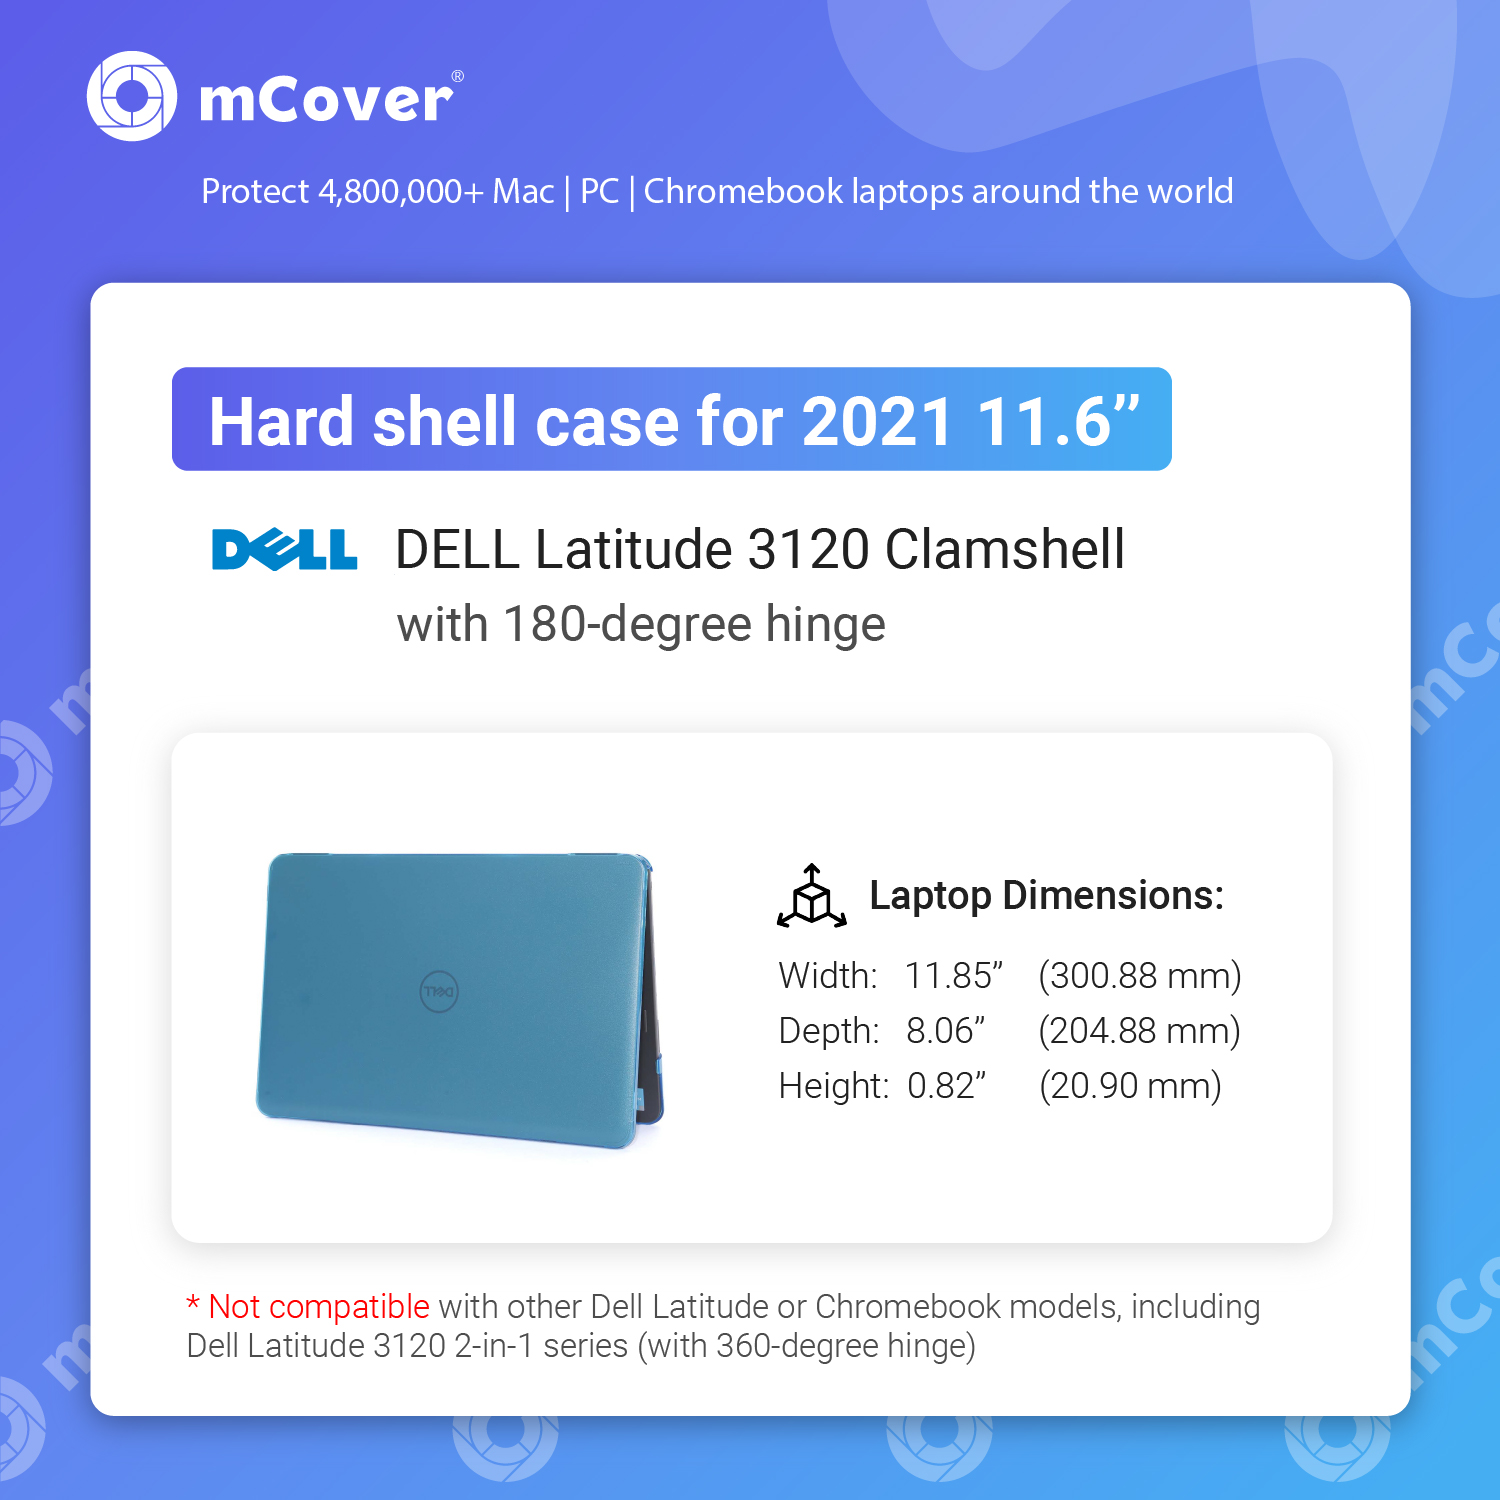 mCover® Hard shell case for 2021  Dell Latitude 3120 Clamshell  Windows Laptops